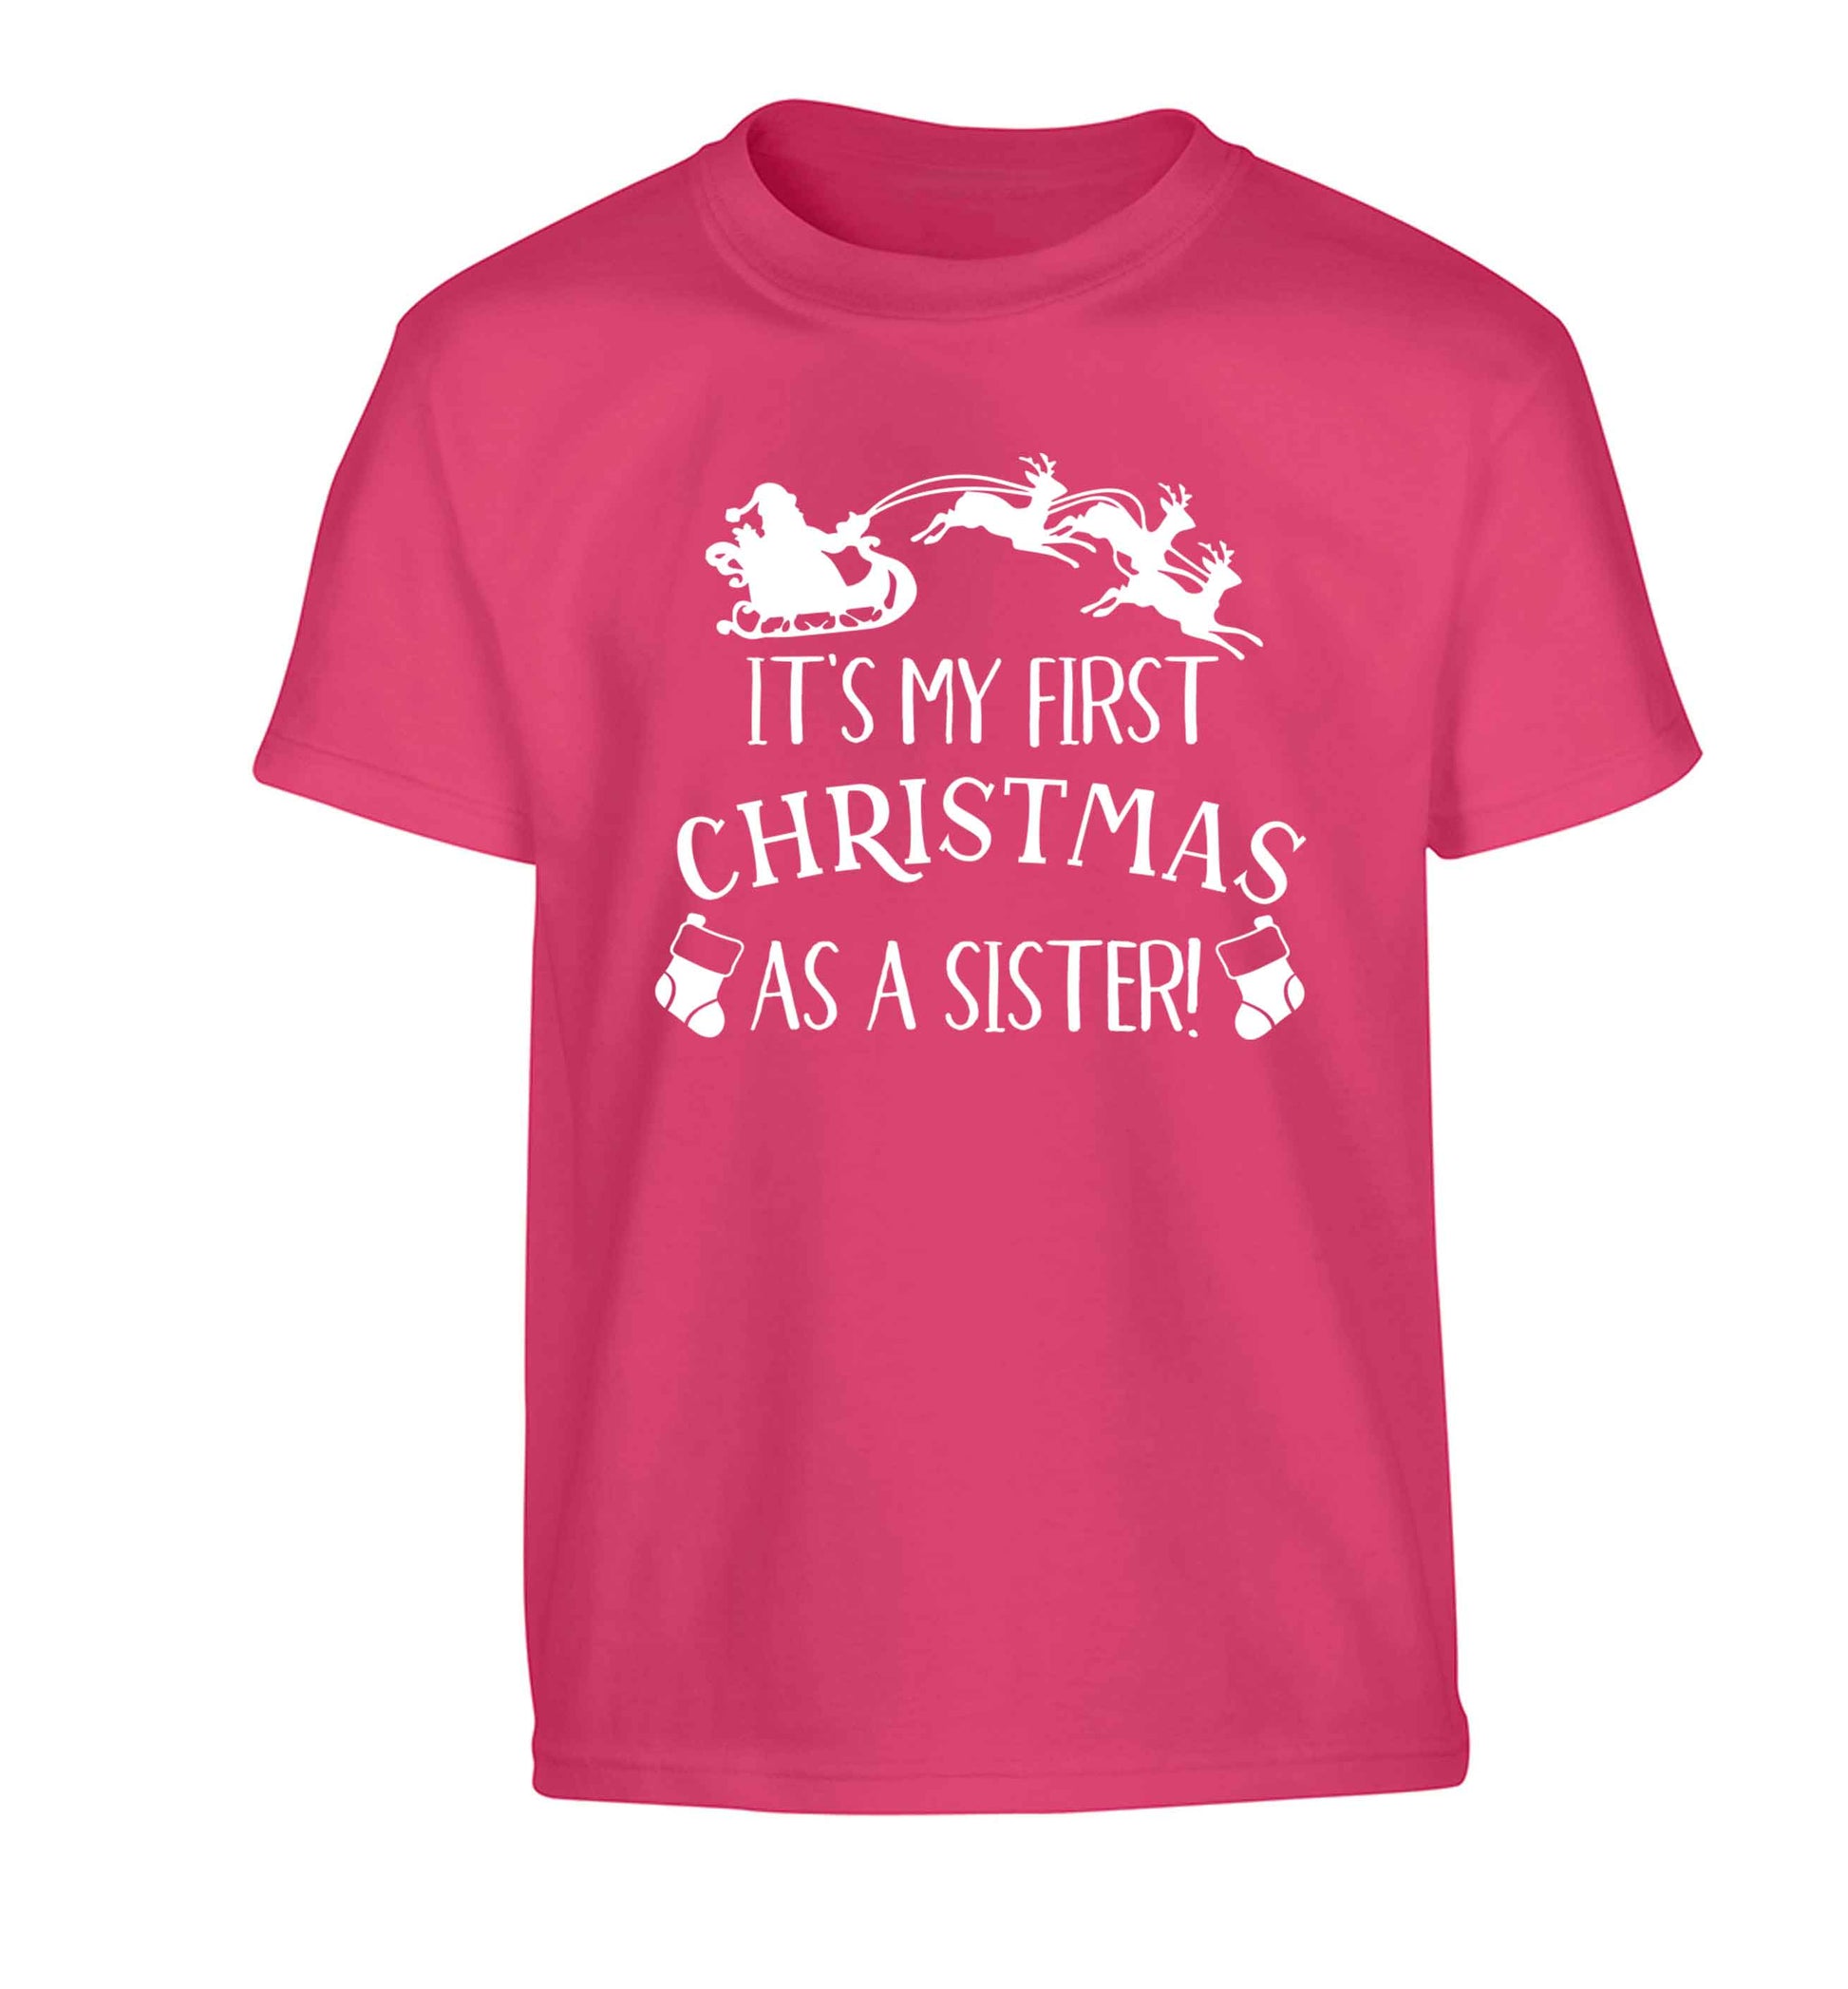 It's my first Christmas as a sister! Children's pink Tshirt 12-13 Years